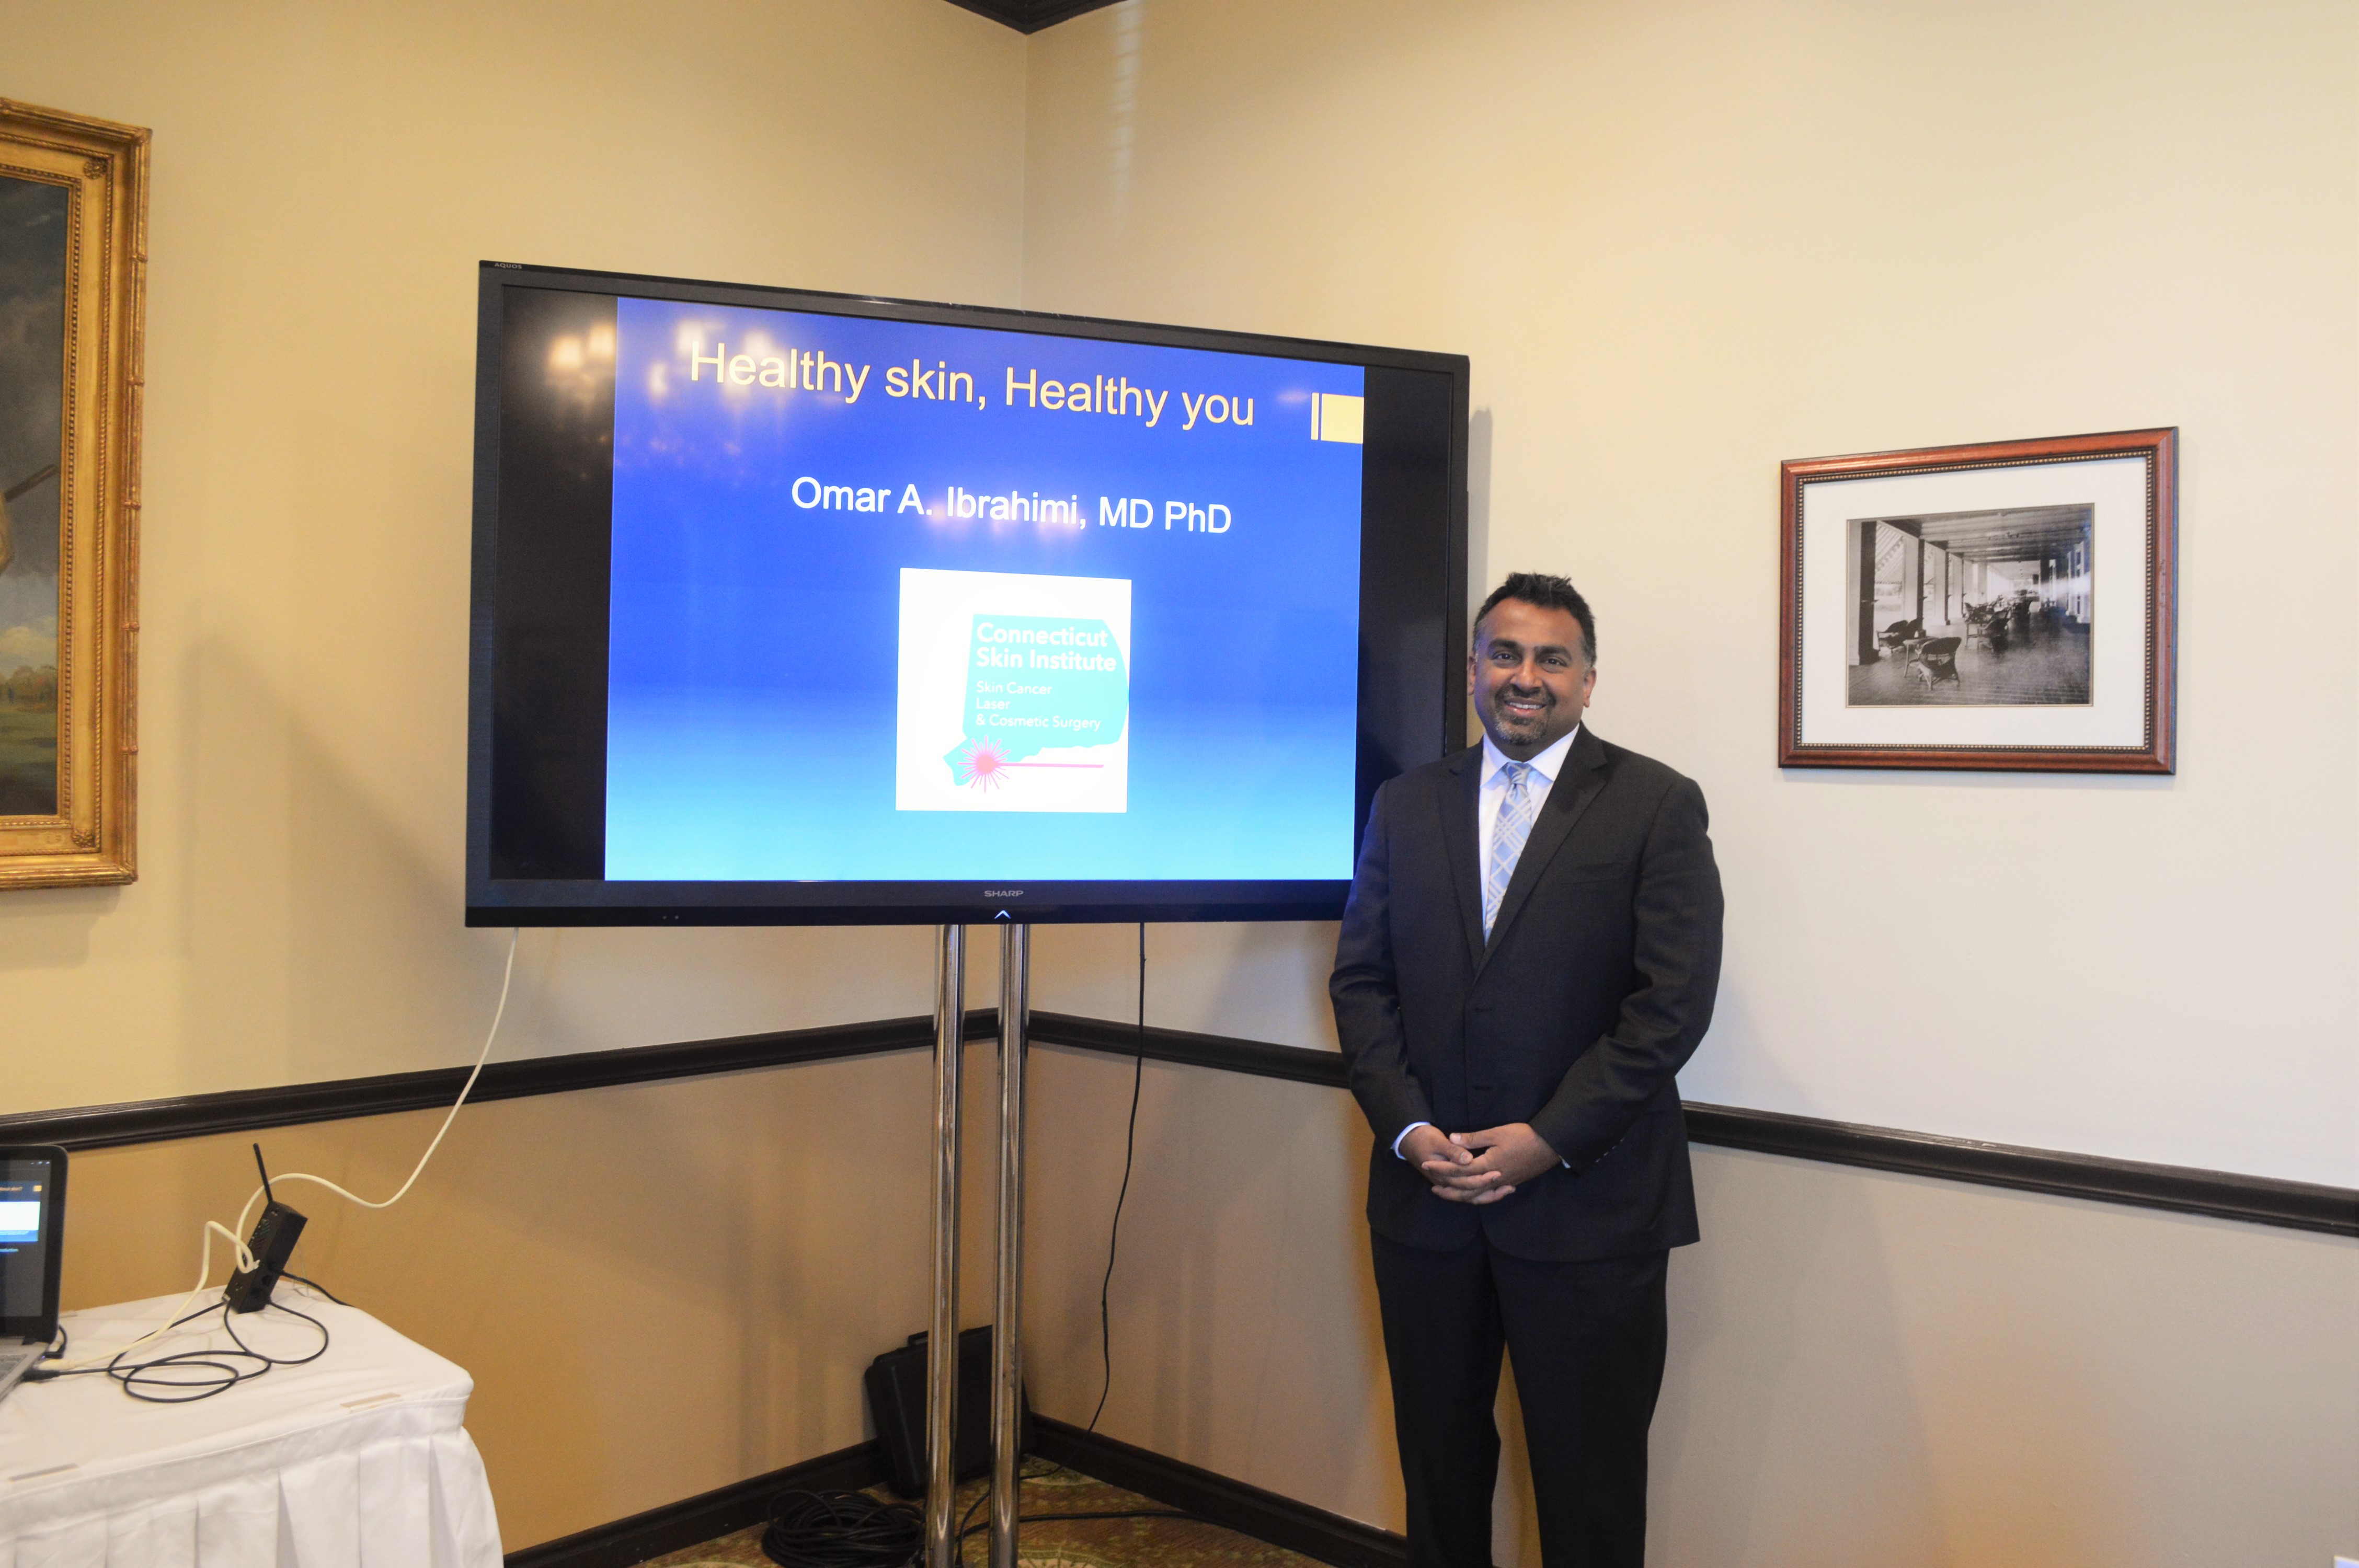 Dermatologist: Healthy Skin, Healthy You- Dr. Ibrahimi presents at the Women in Business Event held at Greenwich Country Club.